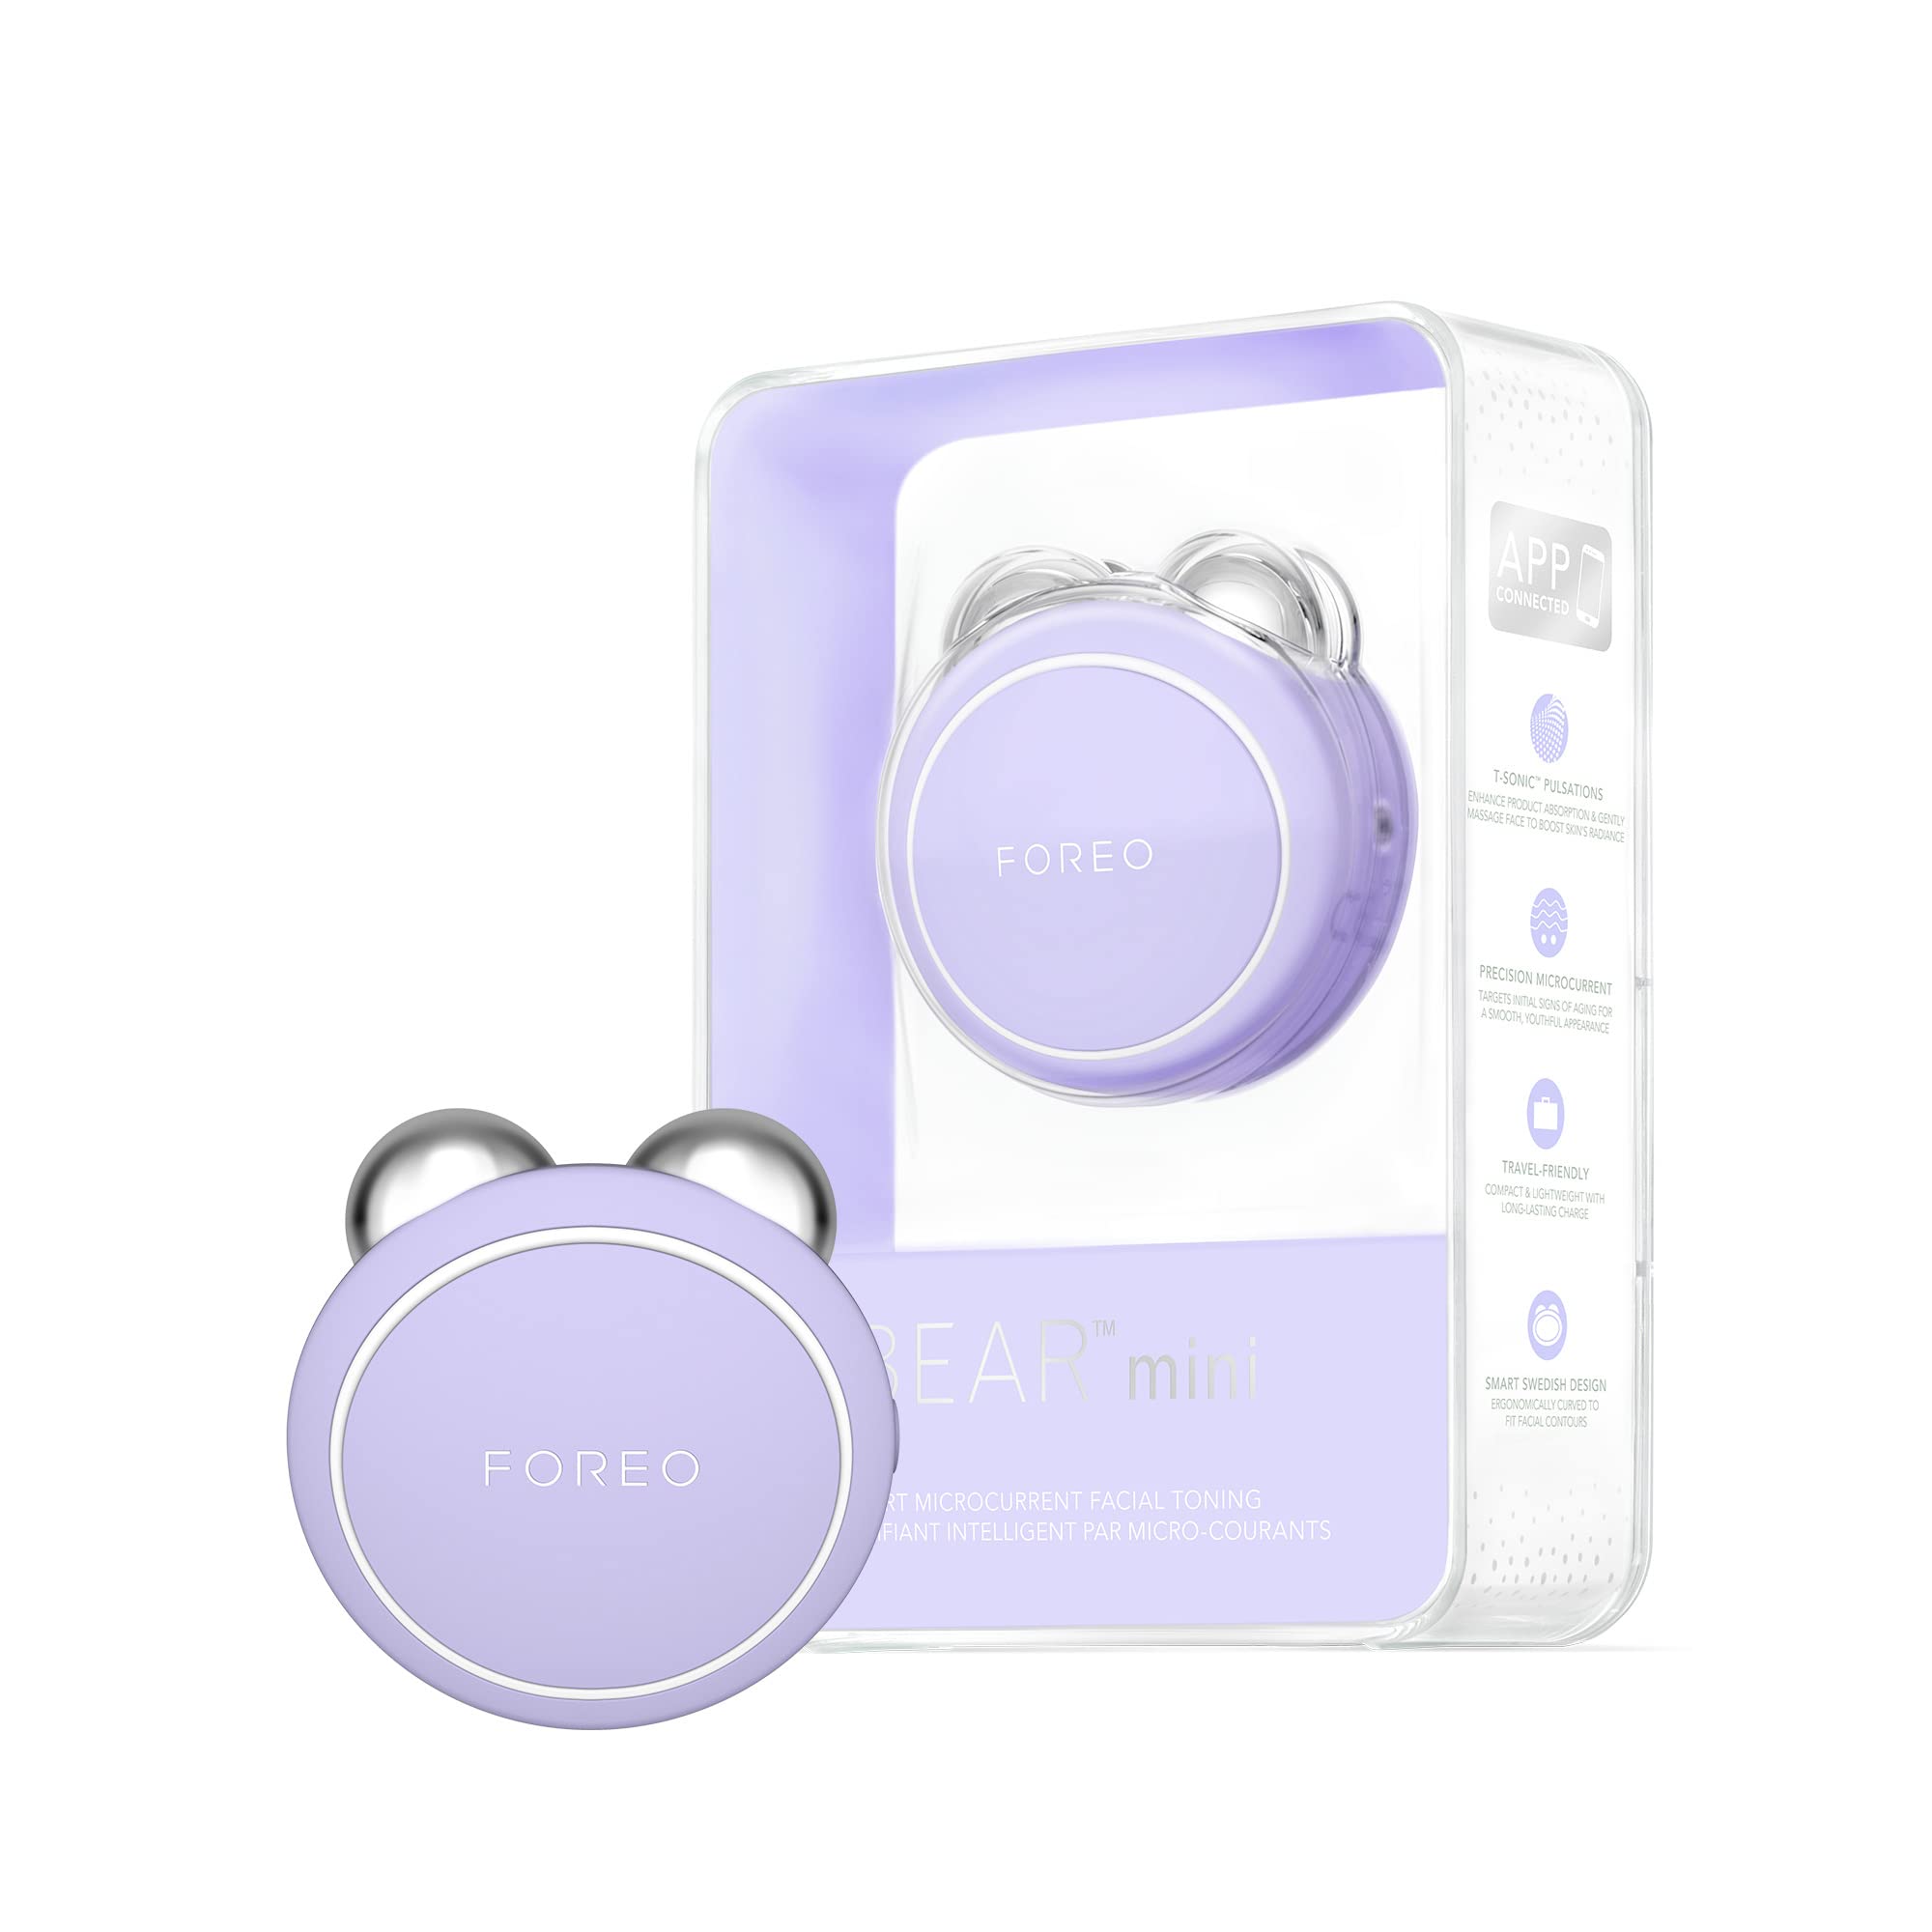 FOREO Bear Smart Microcurrent Facial Toning Device for sale online